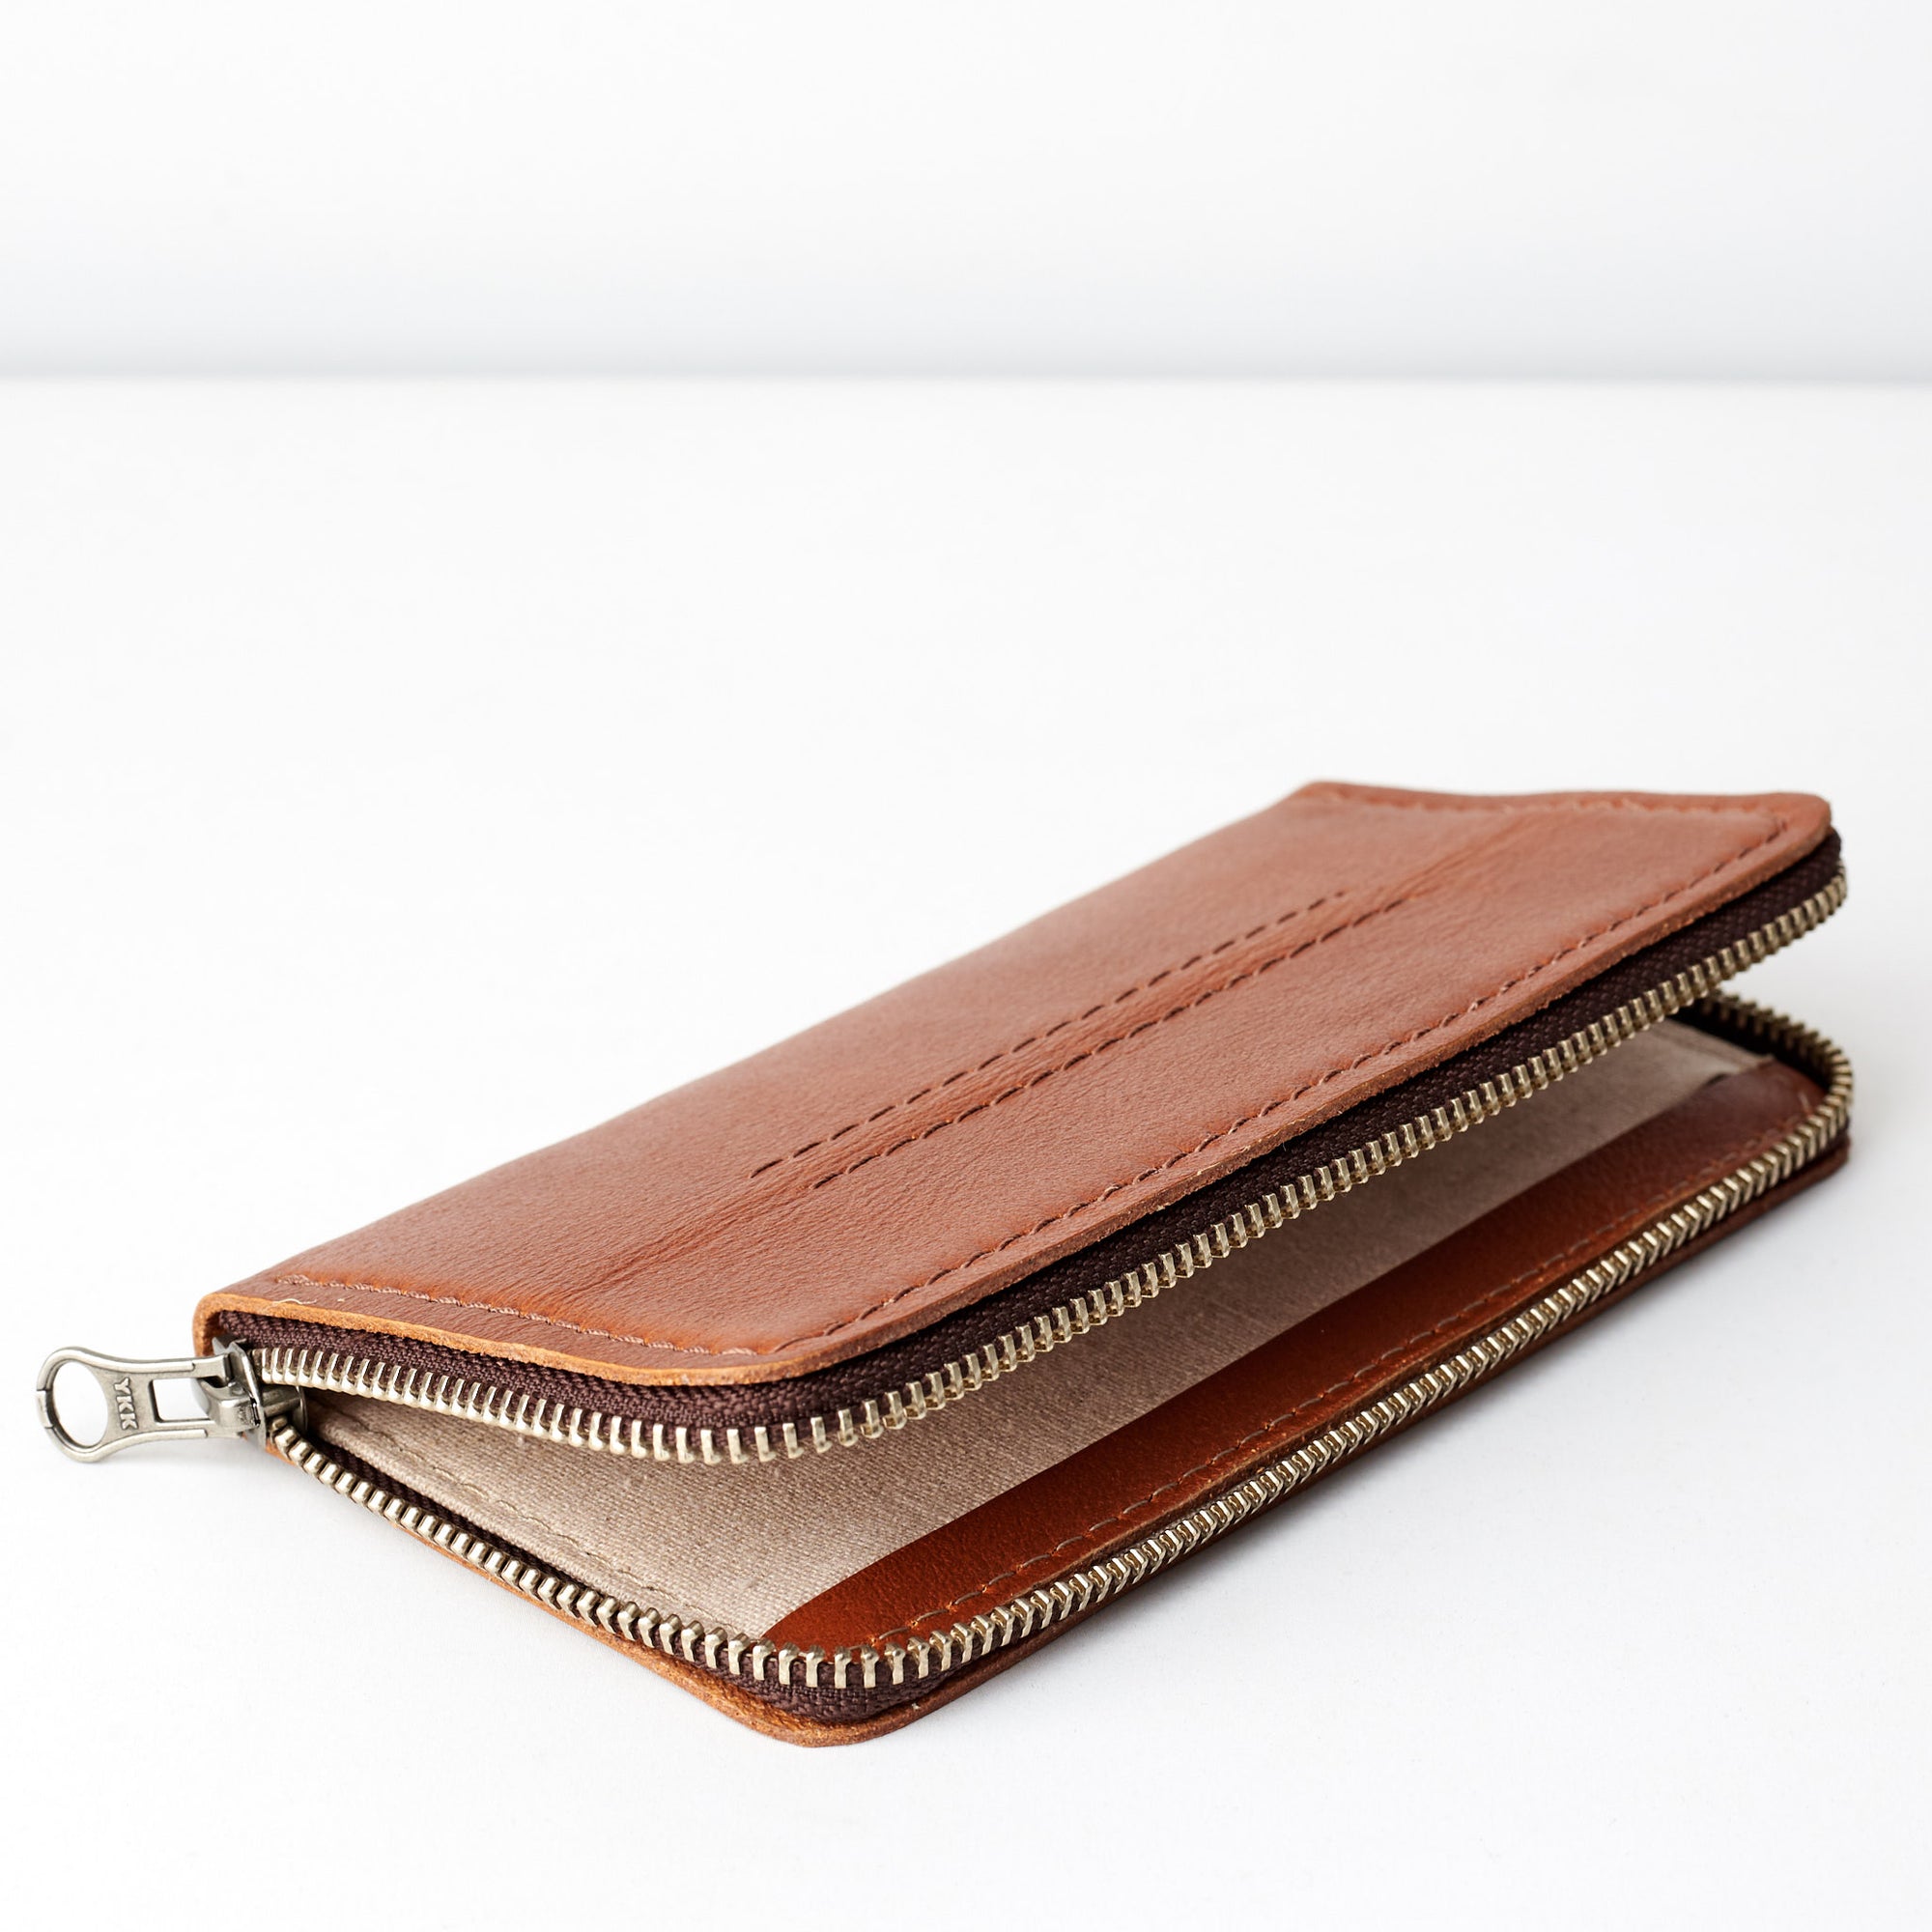 Linen interior. Carefully handcrafted brown leather case stand wallet for new Google Pixel 2 and 2 XL. Men's Pixel sleeve with card holder. Crafted by Capra Leather.